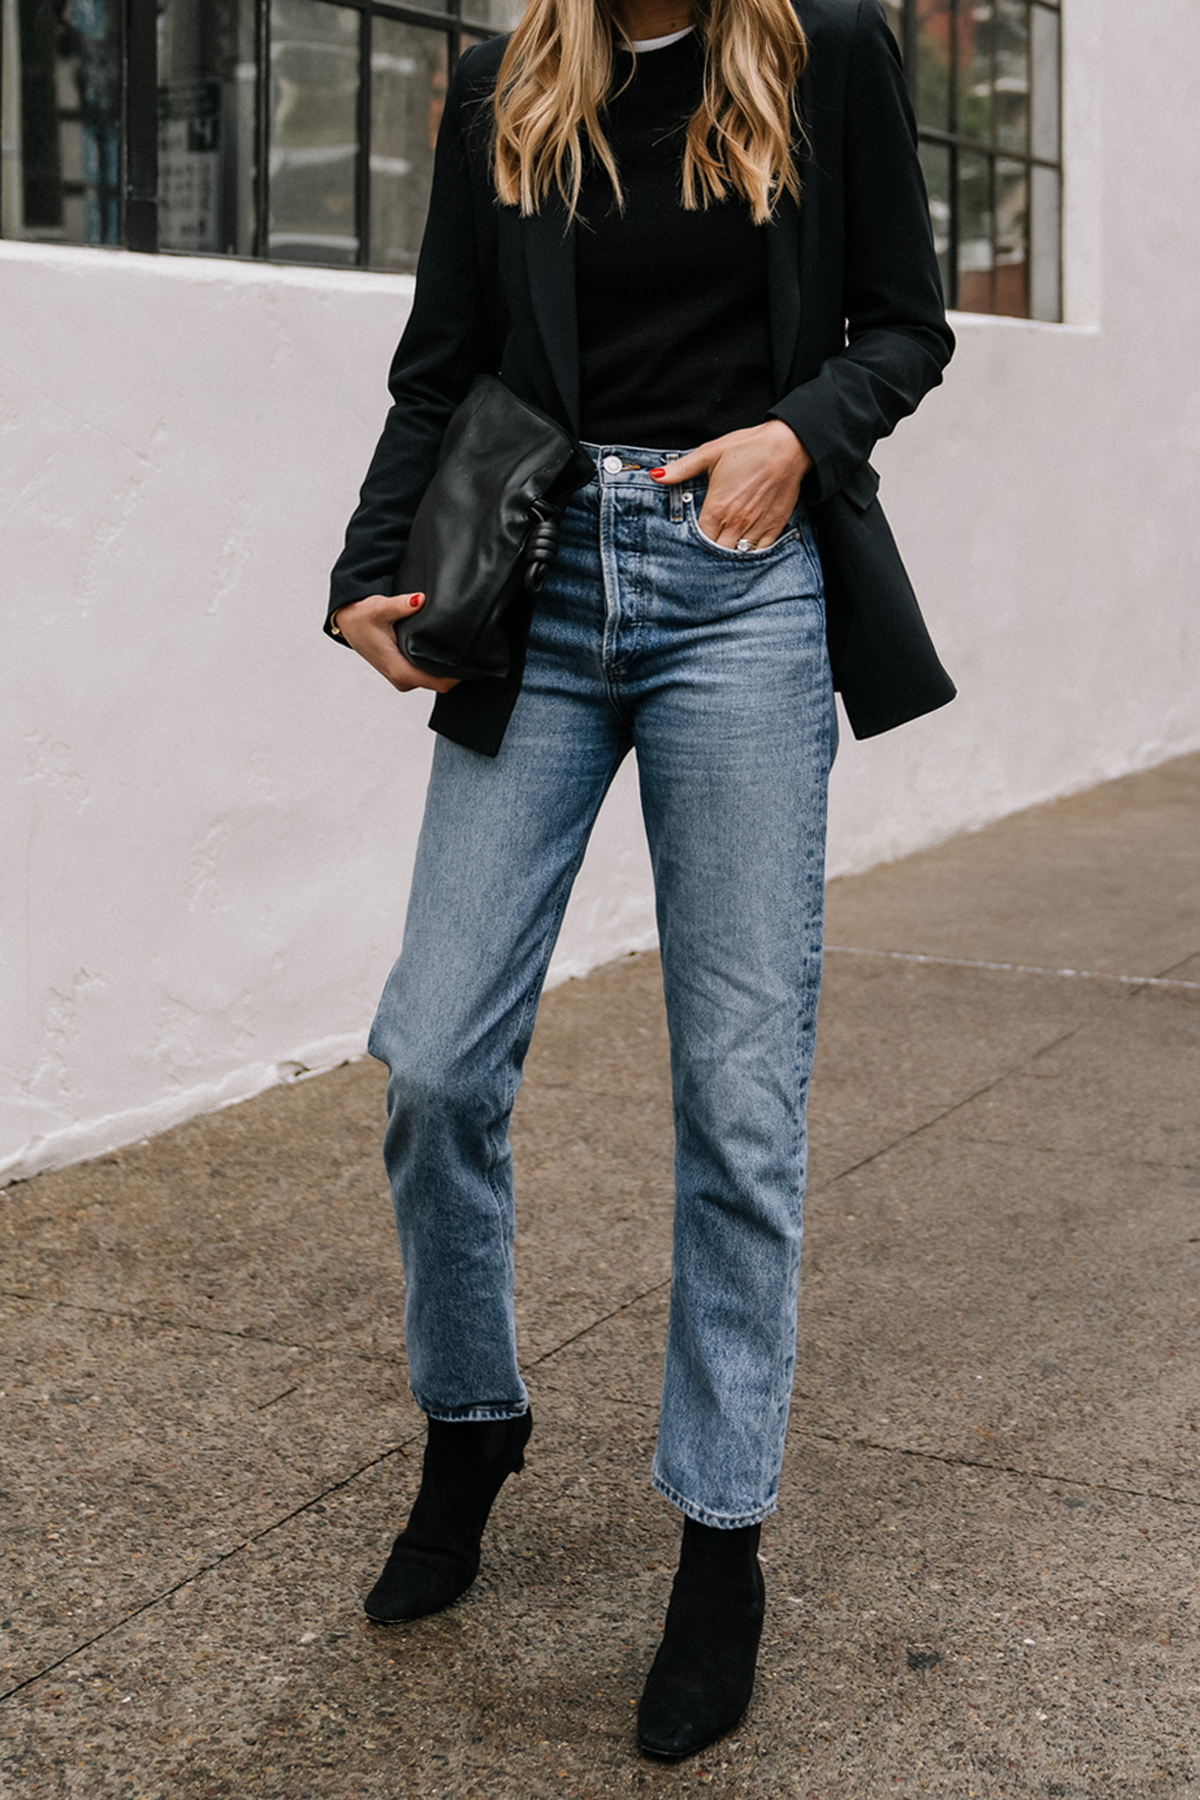 Insister Delvis Faret vild Outfit Ideas with Jeans for Business Casual Days - Fashion Jackson